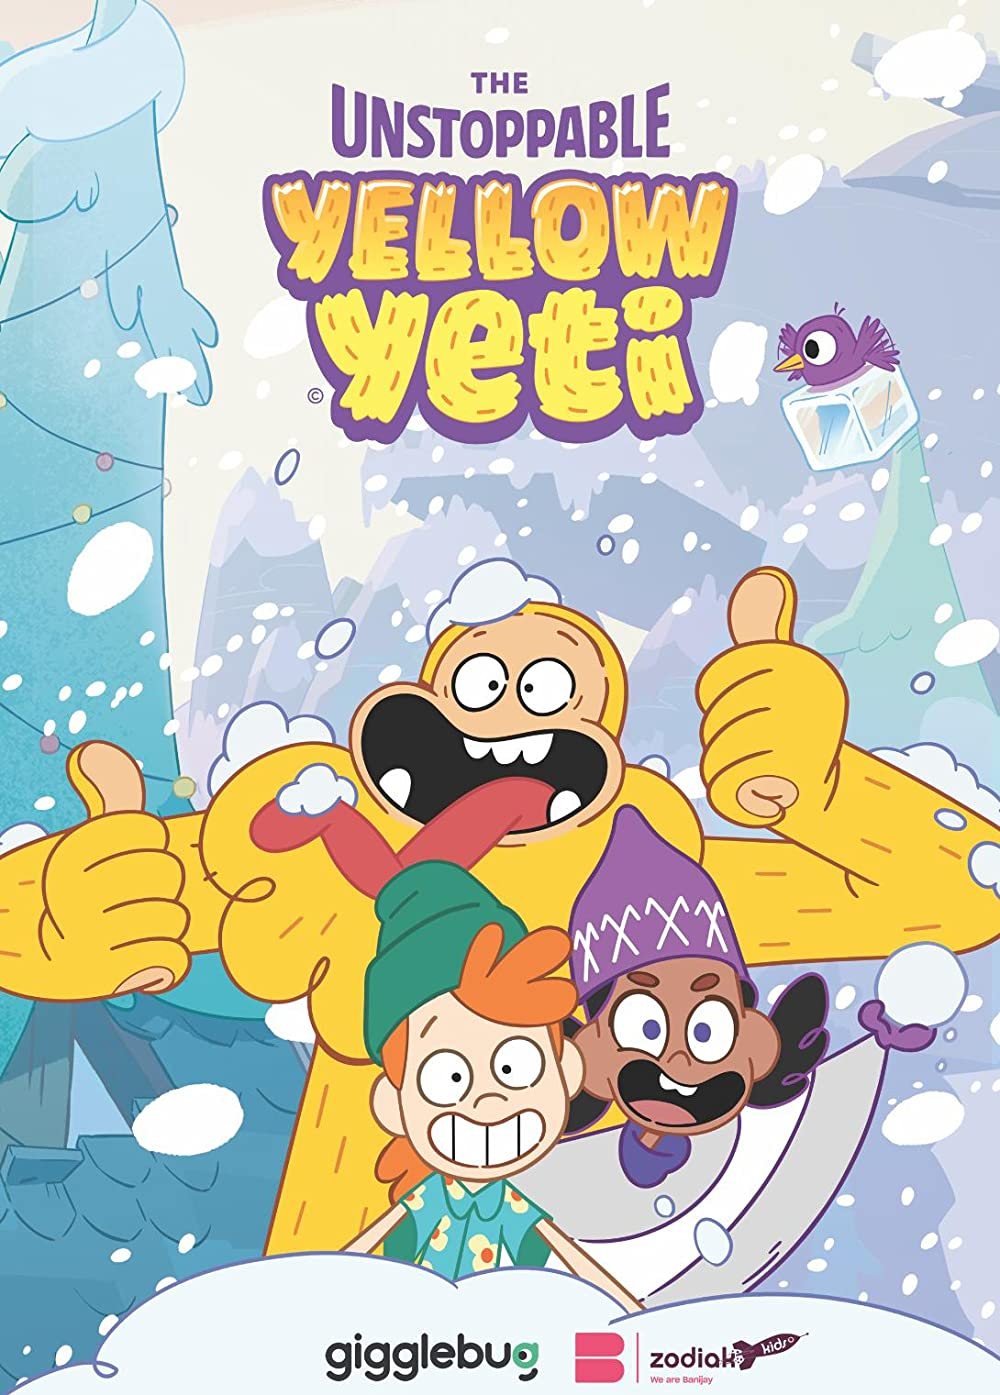 https://static.wikia.nocookie.net/iepfanon/images/3/36/The_Unstoppable_Yellow_Yeti_-_poster.png/revision/latest?cb=20221003210159